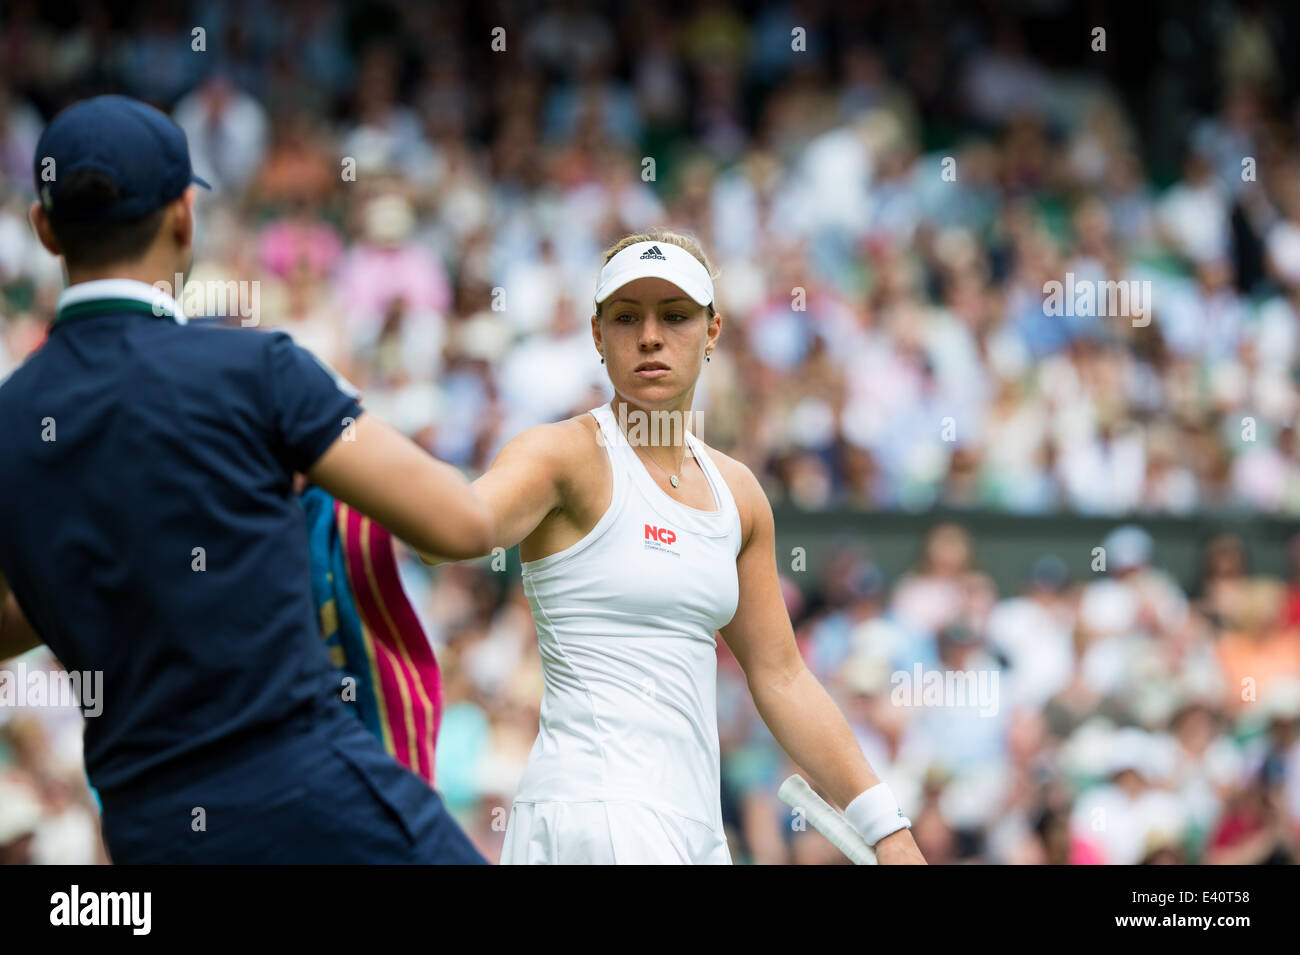 Wimbledon, London, UK. 1st July, 2014. Tennis: Wimbledon Championship 2014, Angelique Kerber of Germany during her Ladies' Singles fourth round match against Maria Sharapova of Russia on day eight of the Wimbledon Lawn Tennis Championships at the All England Lawn Tennis and Croquet Club at Wimbledon on July 1, 2014, London, England. Credit:  dpa picture alliance/Alamy Live News Stock Photo